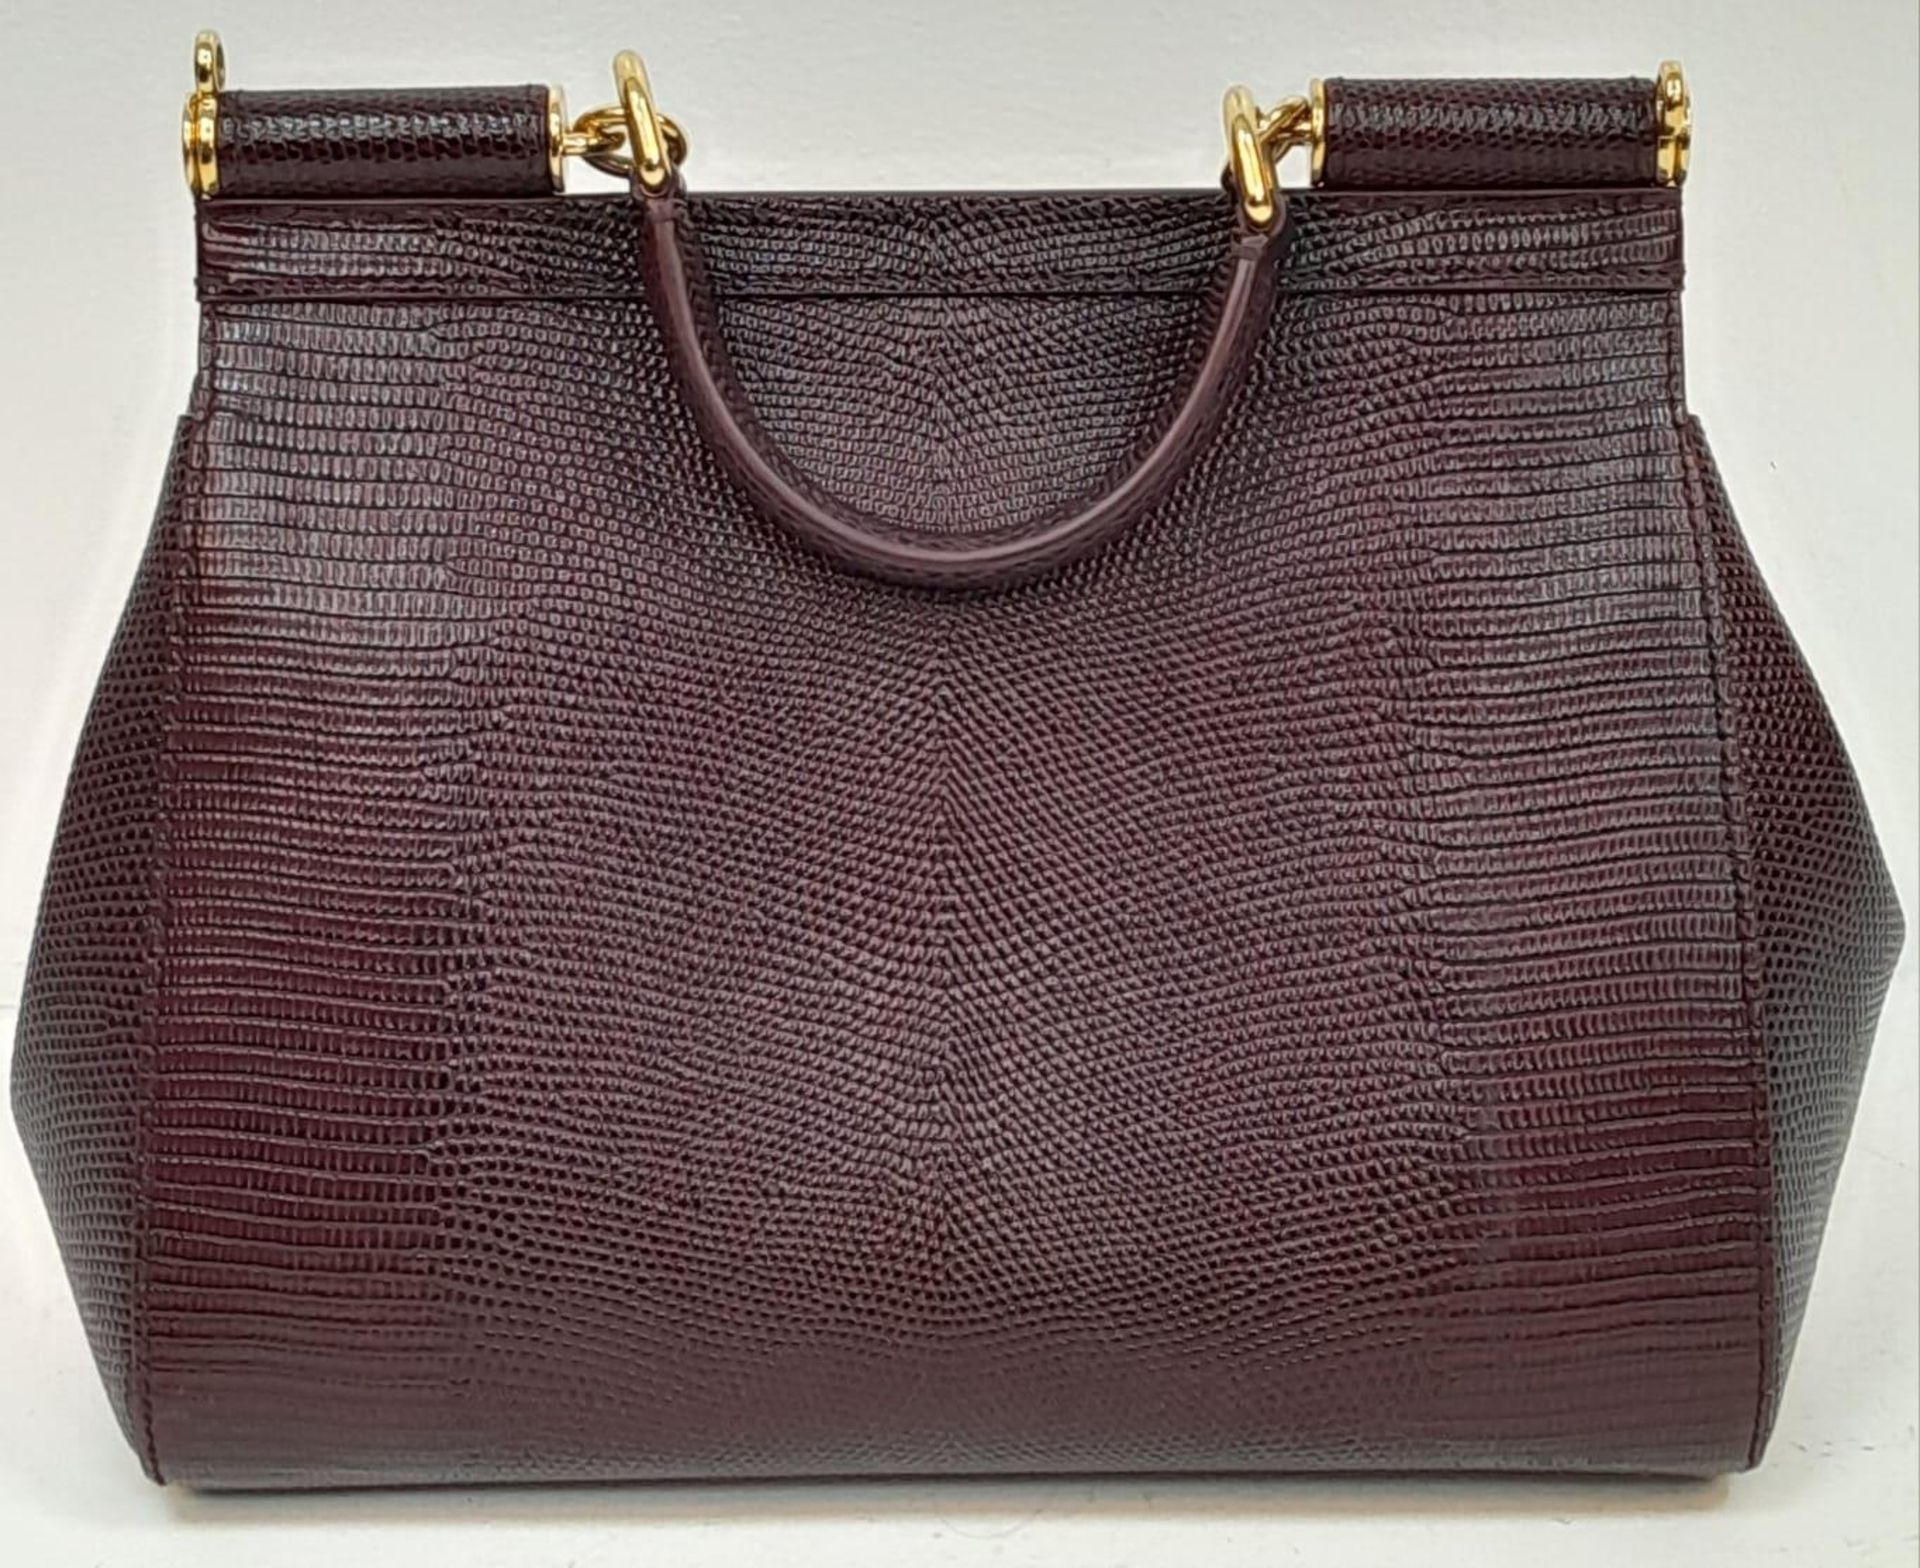 A Dolce & Gabbana Burgundy Miss Sicily Bag. Reptile embossed leather exterior with gold-toned - Image 3 of 6